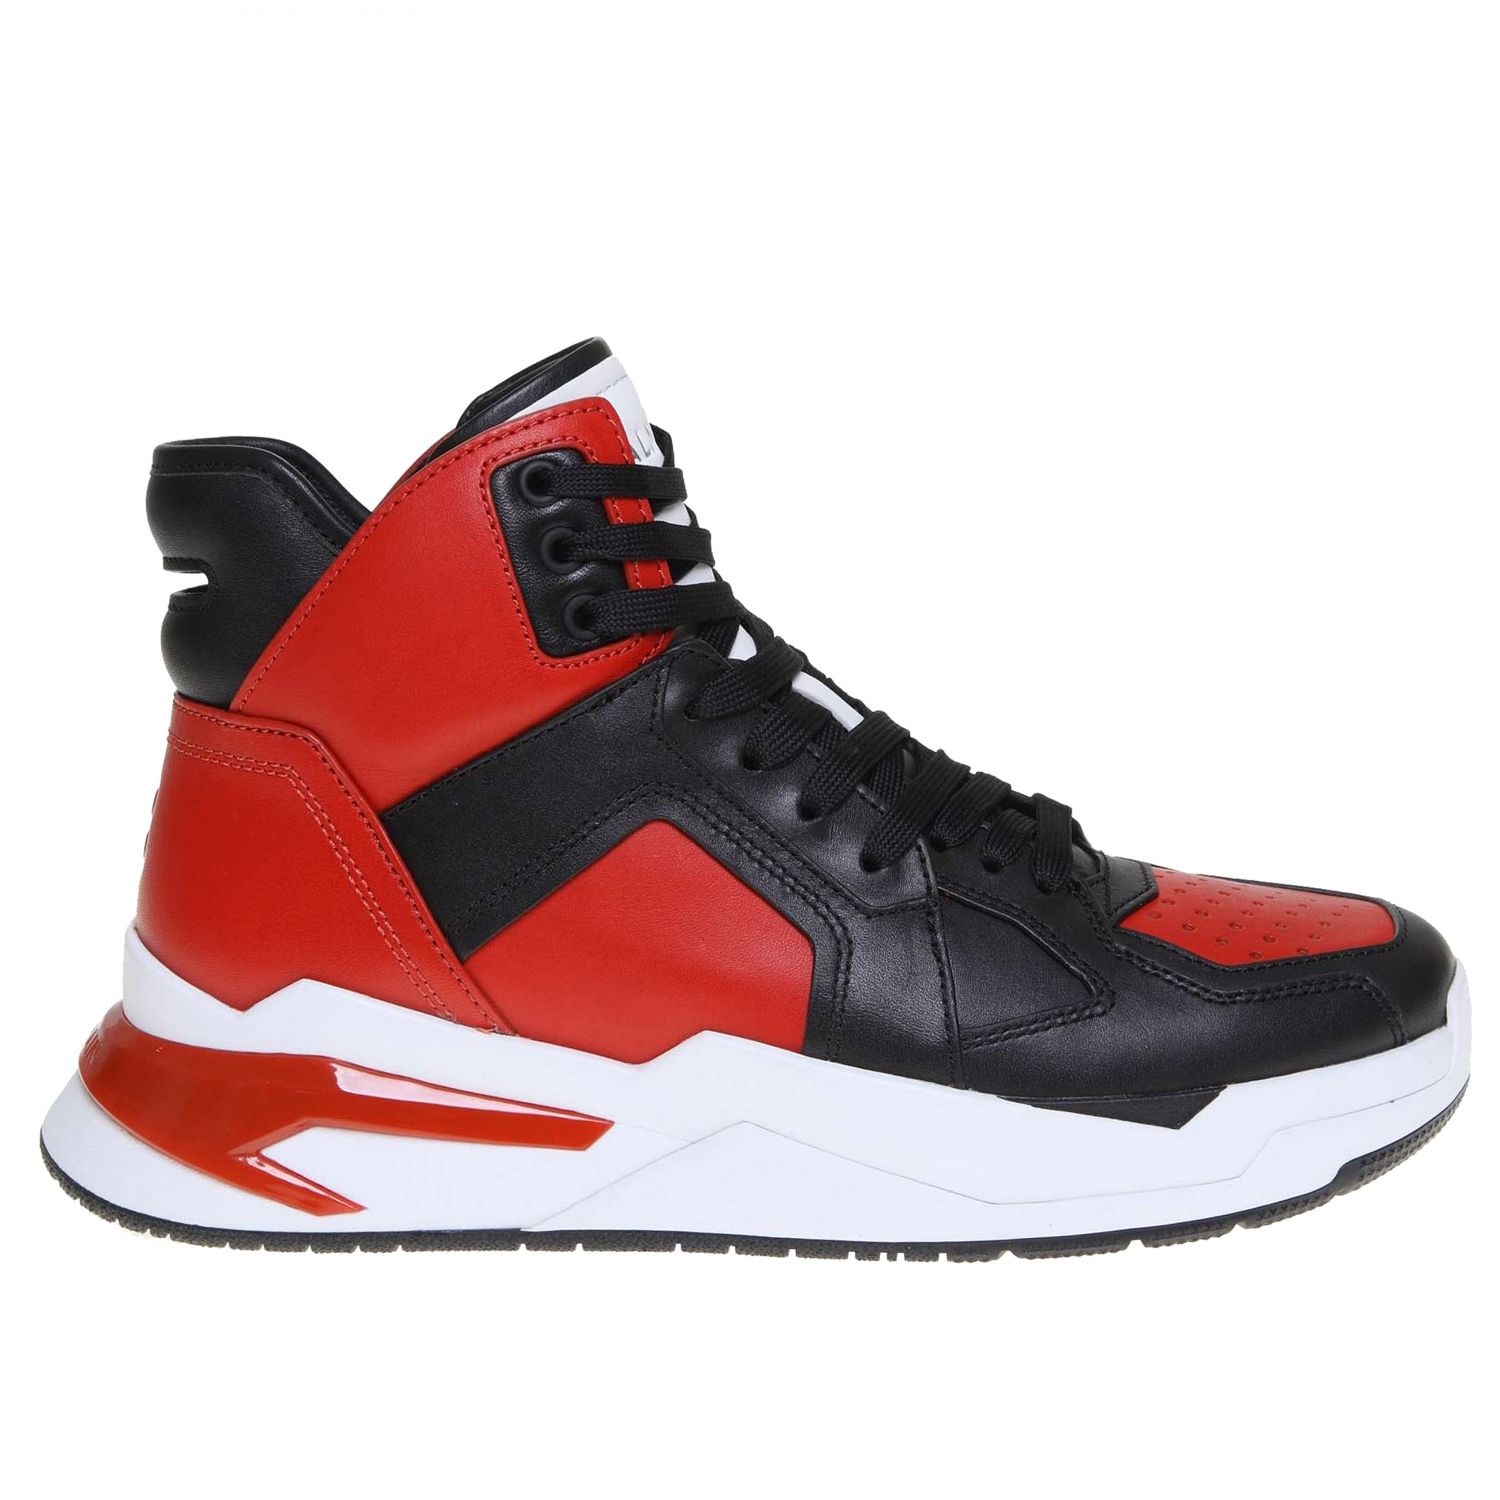 Balmain Outlet: sneakers for man - Red Balmain sneakers SM0C173L015 on